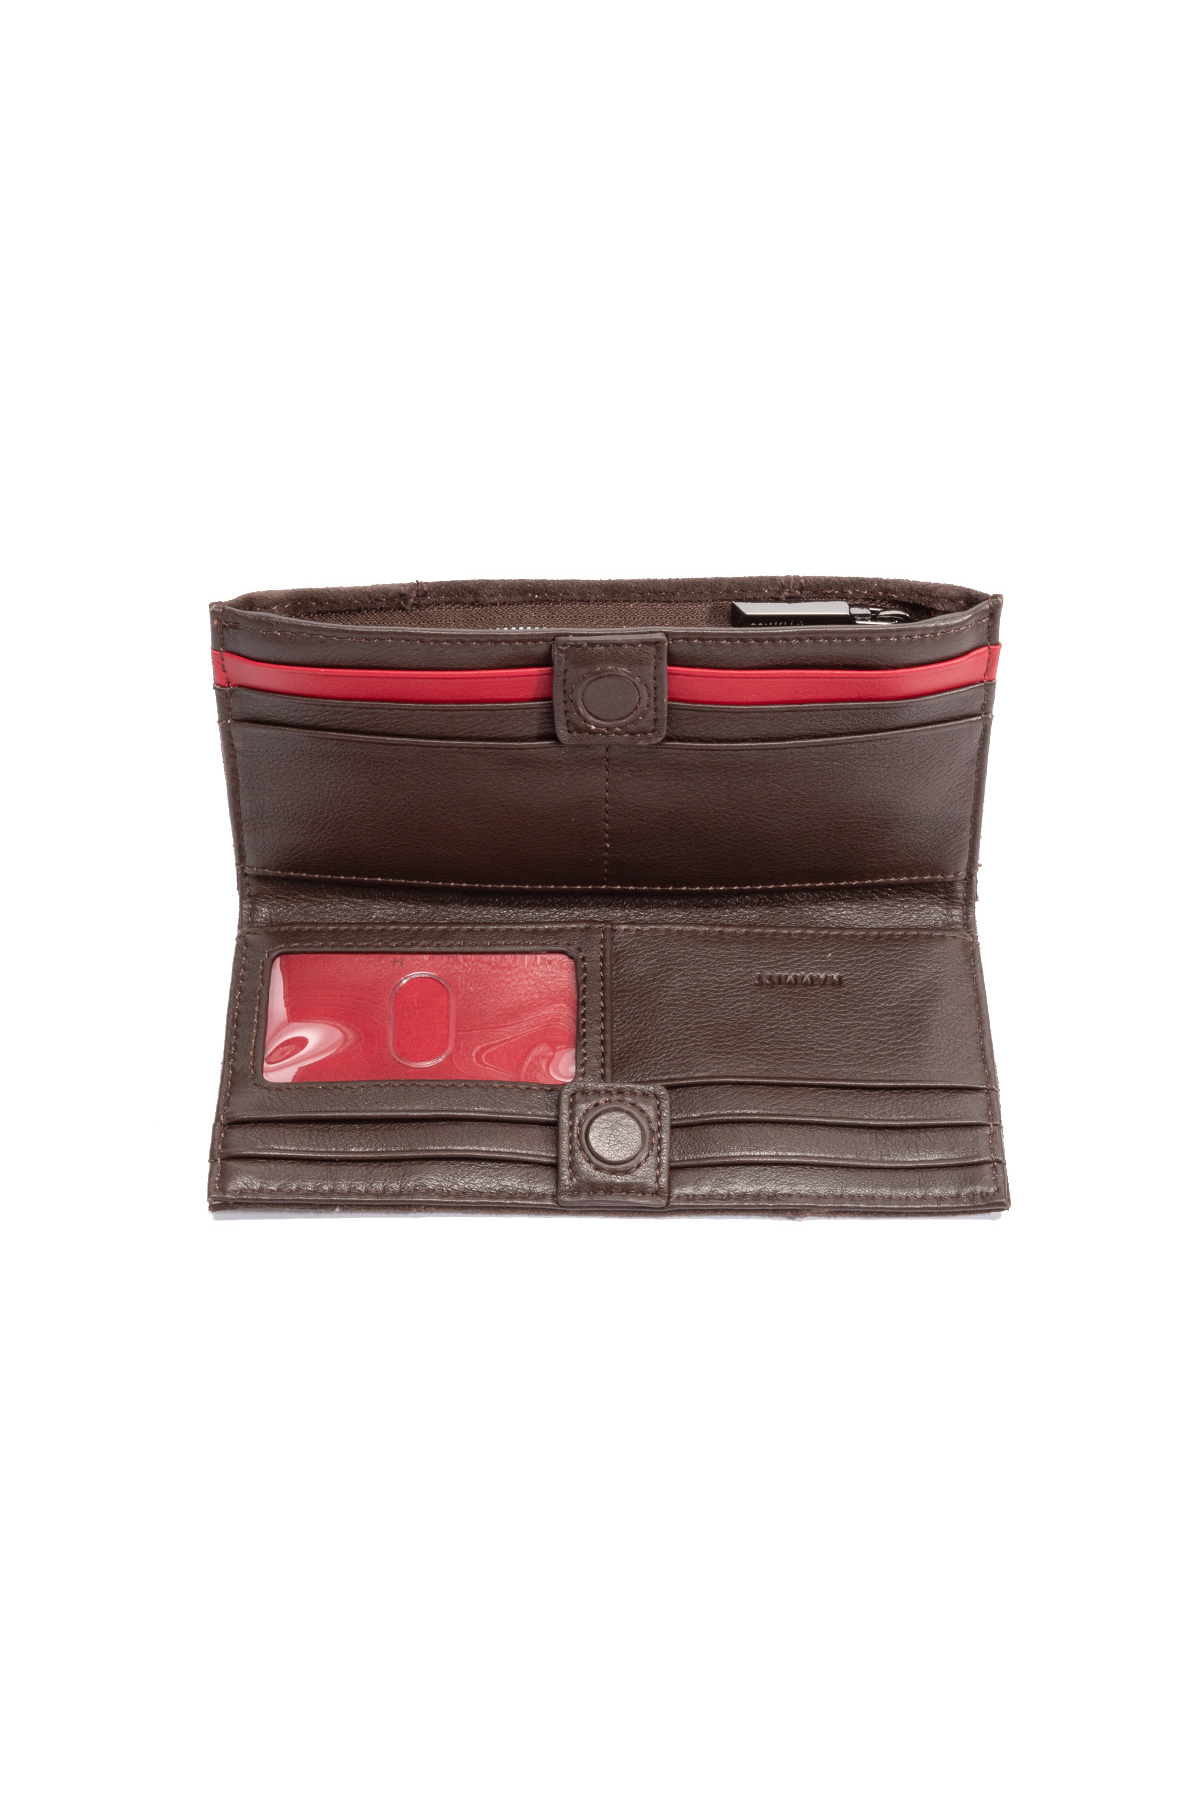 110 North Leather Wallet